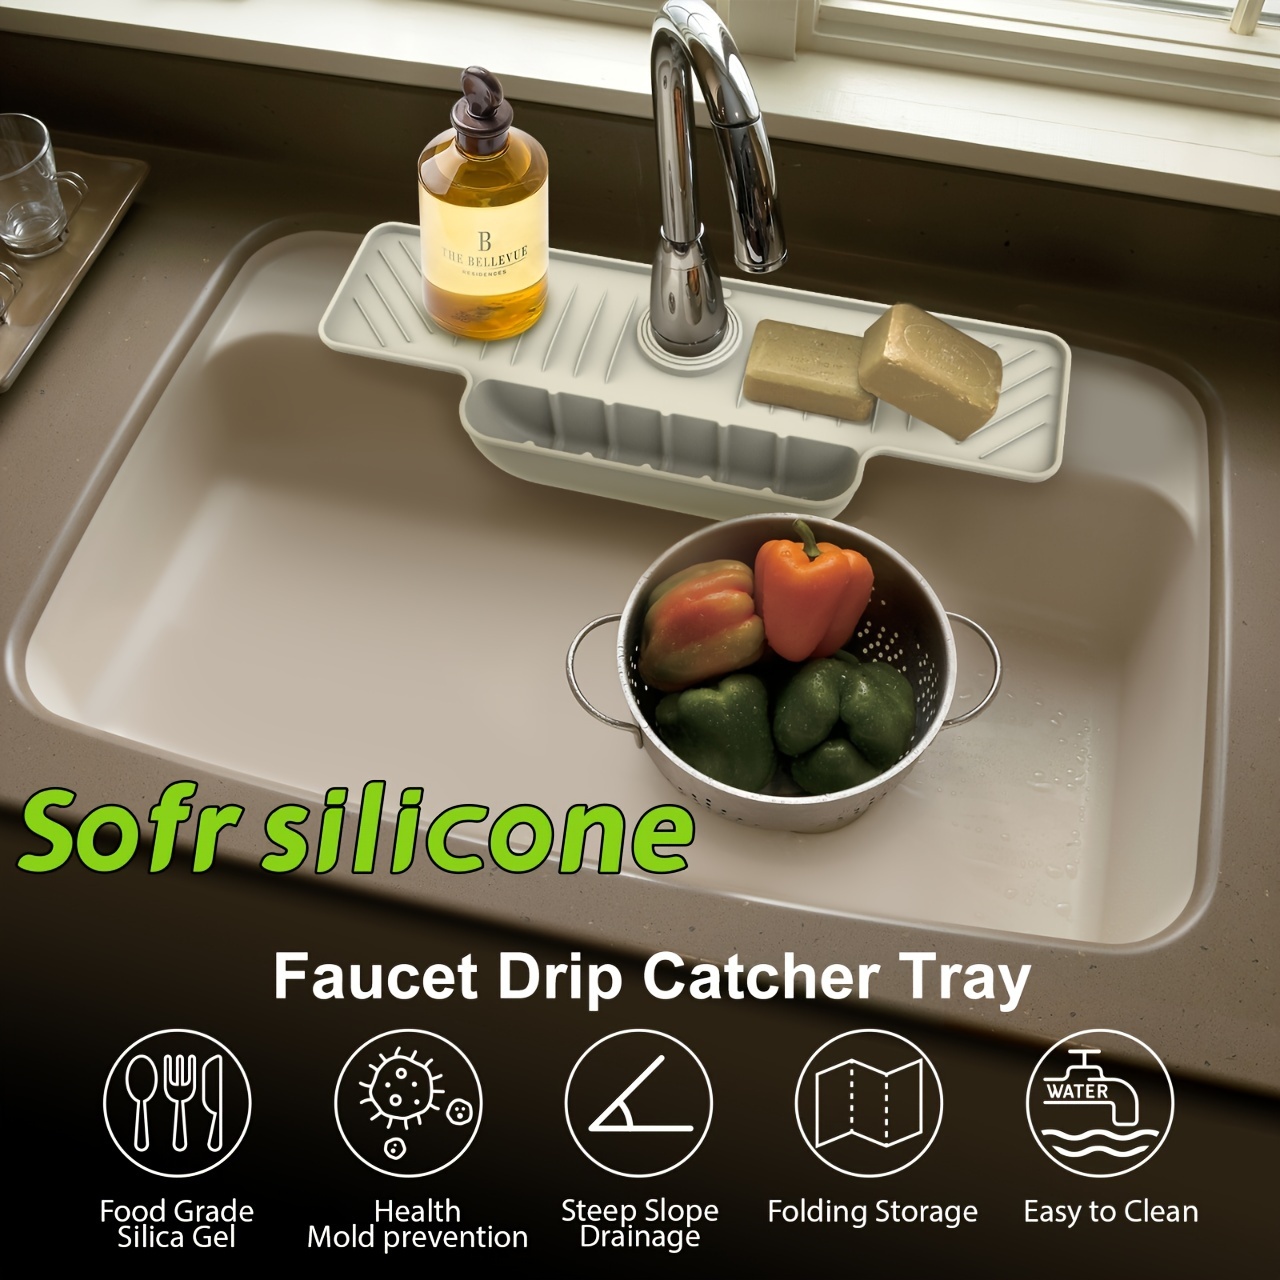 Silicone Sink Faucet Mat for Kitchen Sink, Bathroom Faucet Water Catcher Mat Sink Draining Pad Behind Faucet Drip Protector Splash Countertop